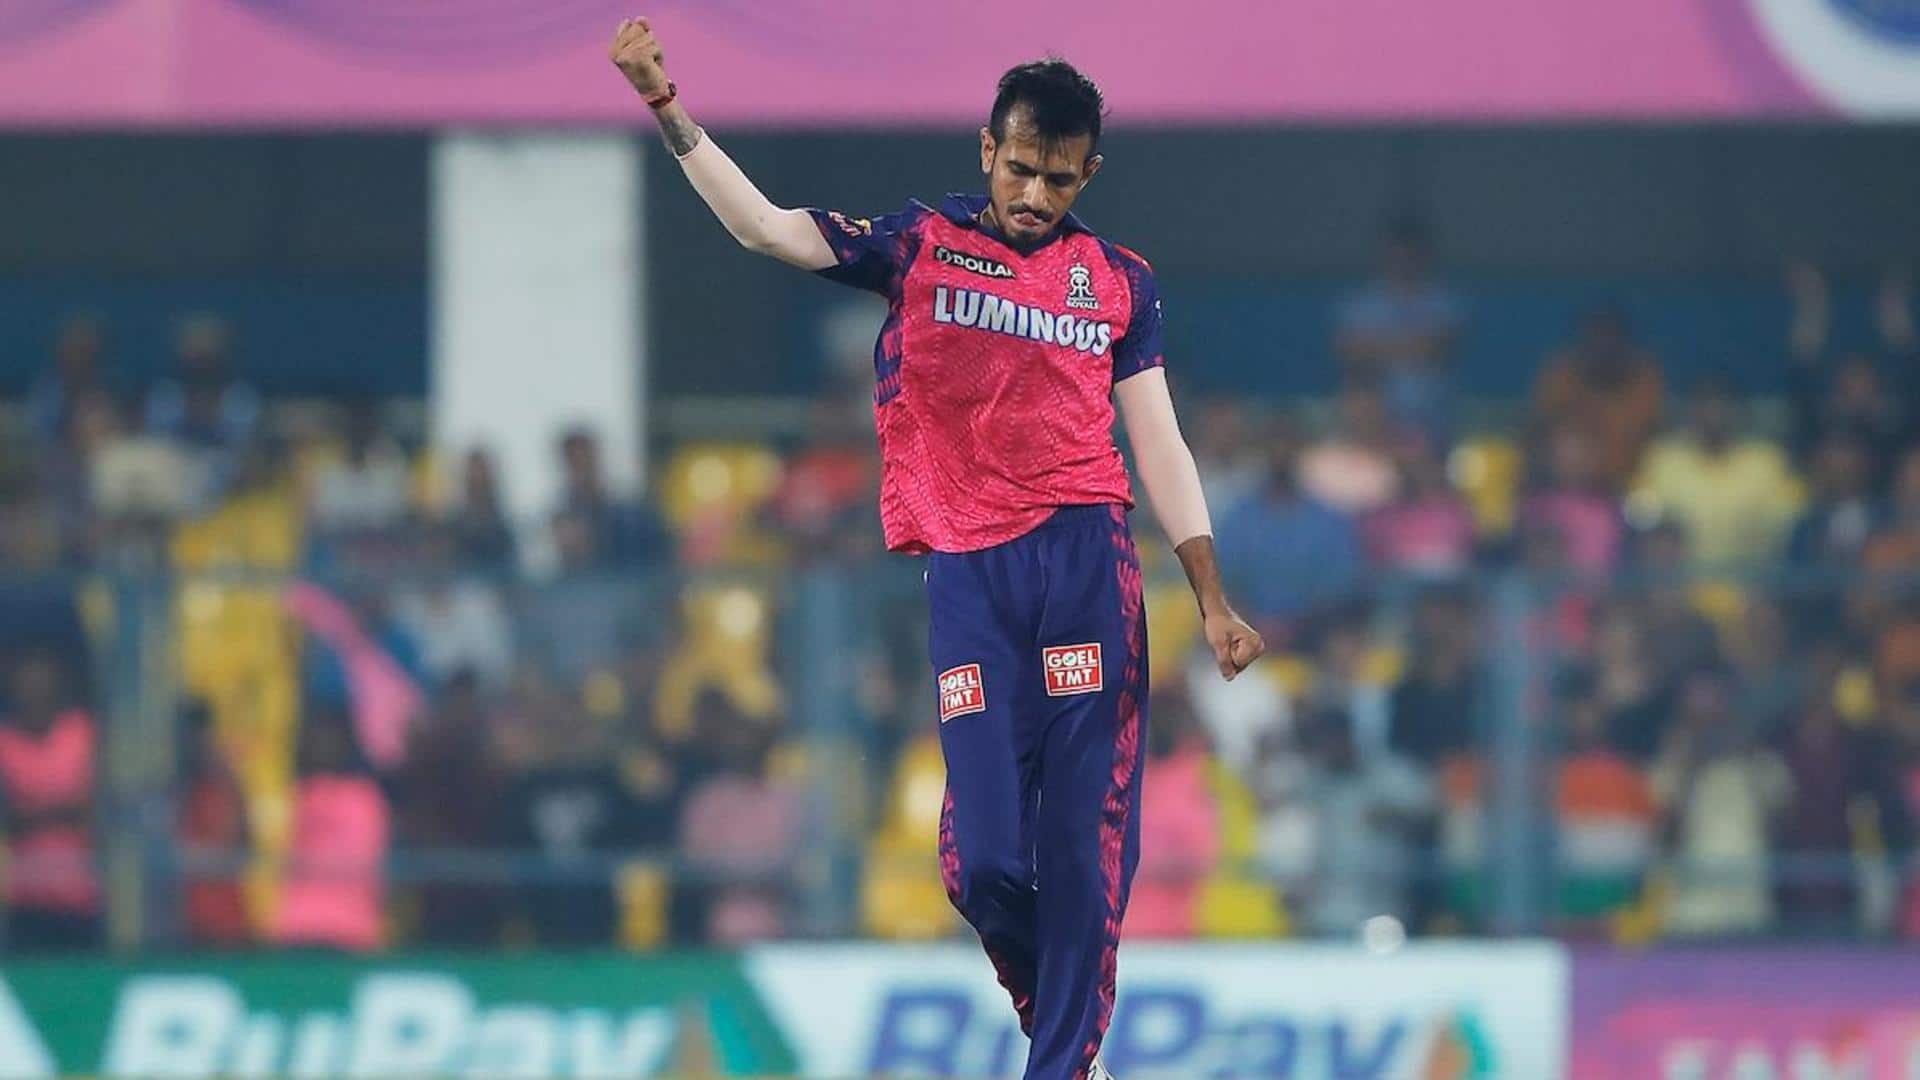 Yuzvendra Chahal becomes the highest wicket-taker in IPL history: Stats 